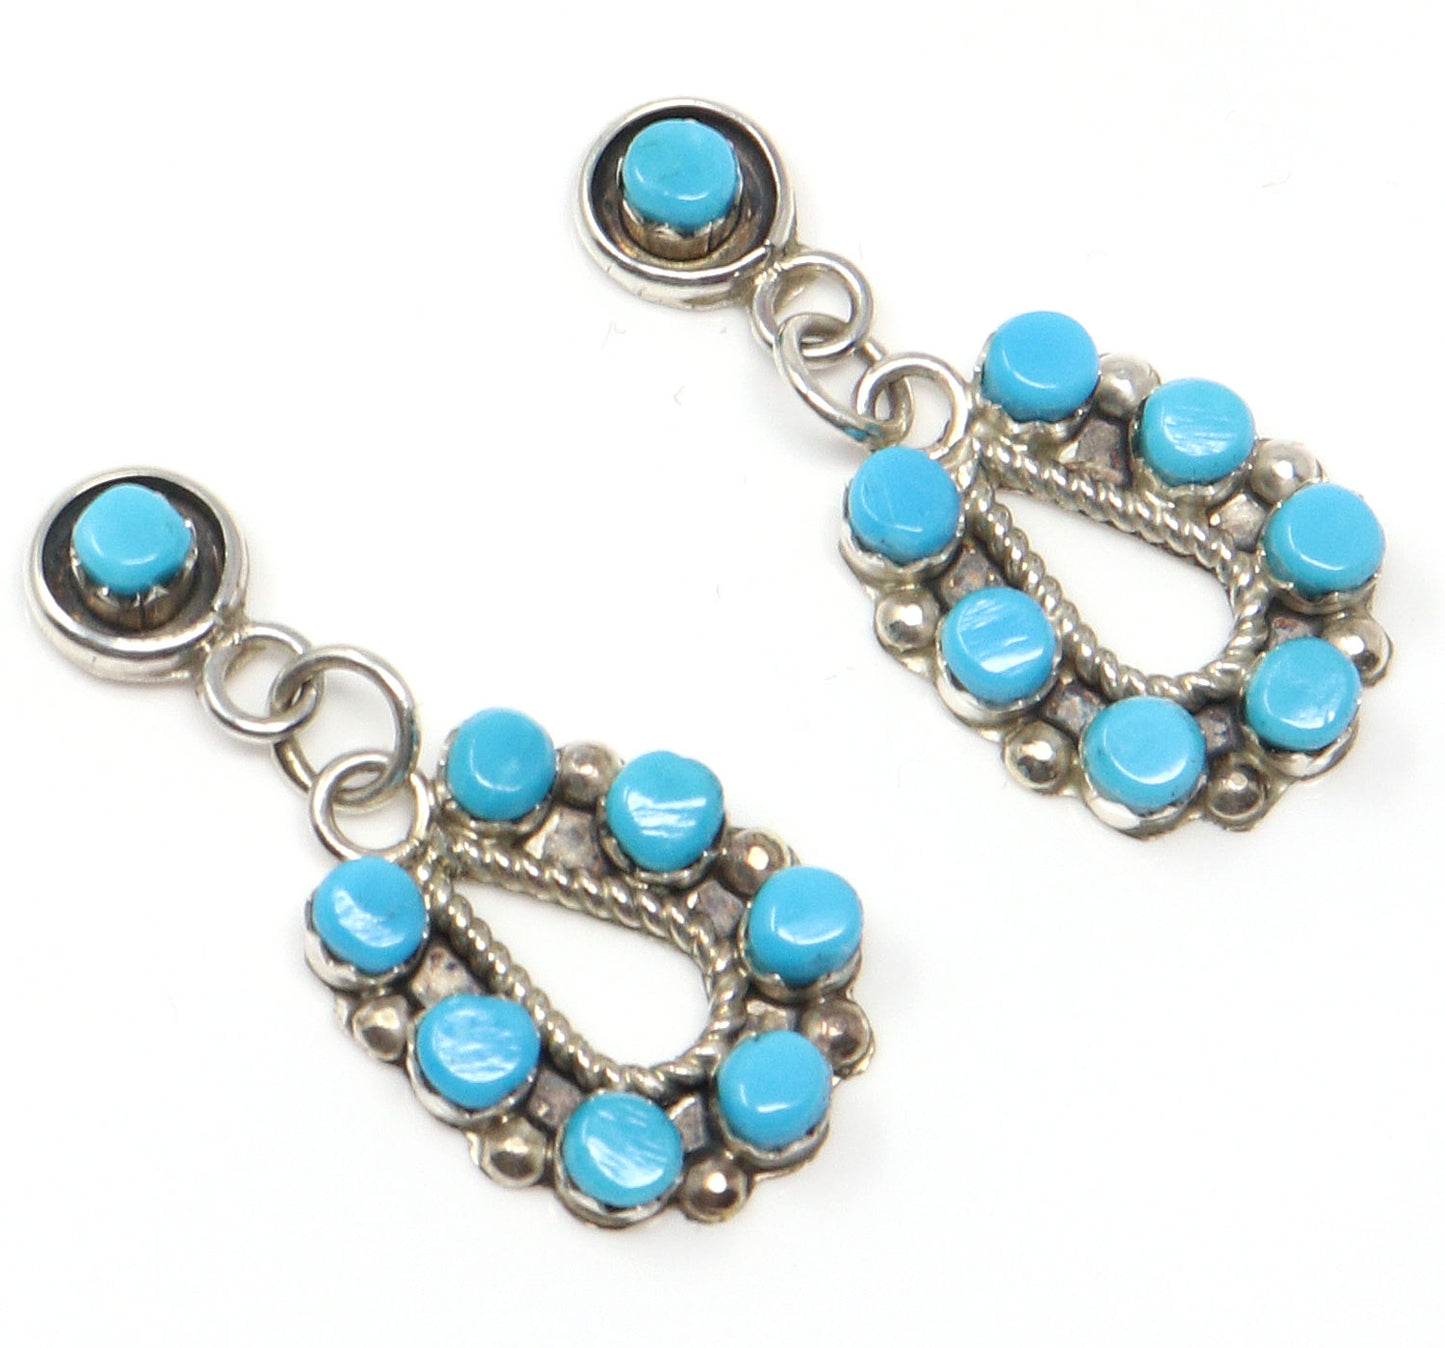 Sterling Silver & Turquoise Dangle Earrings by Laate